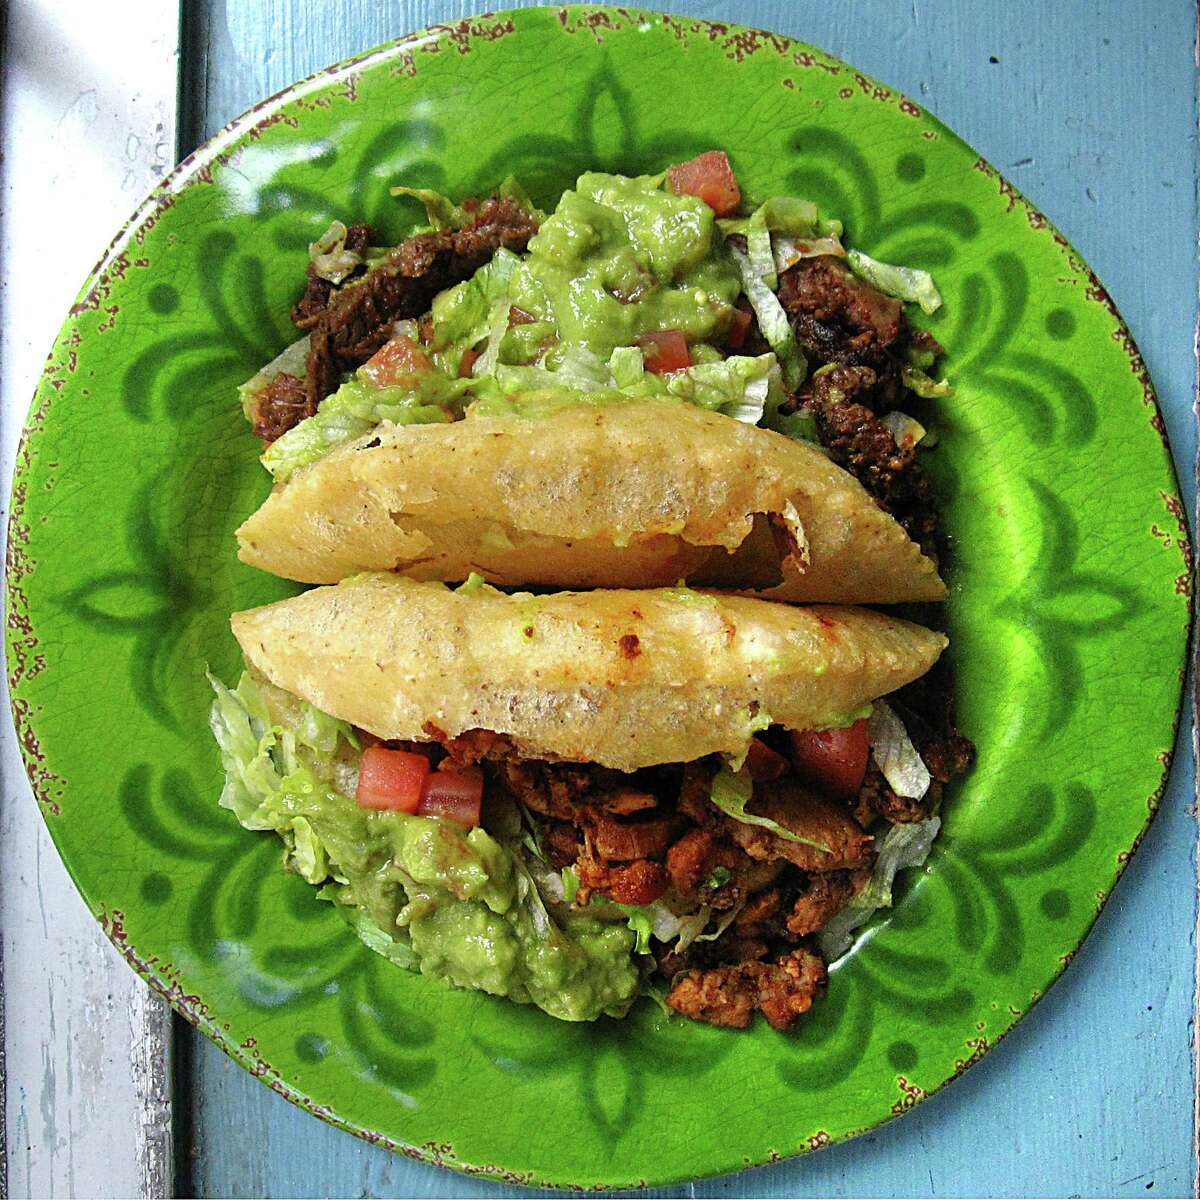 Love fajitas? Love tacos? These San Antonio restaurants are serving up fajita tacos (whether order off the menu or make it yourself) you should definitely try.